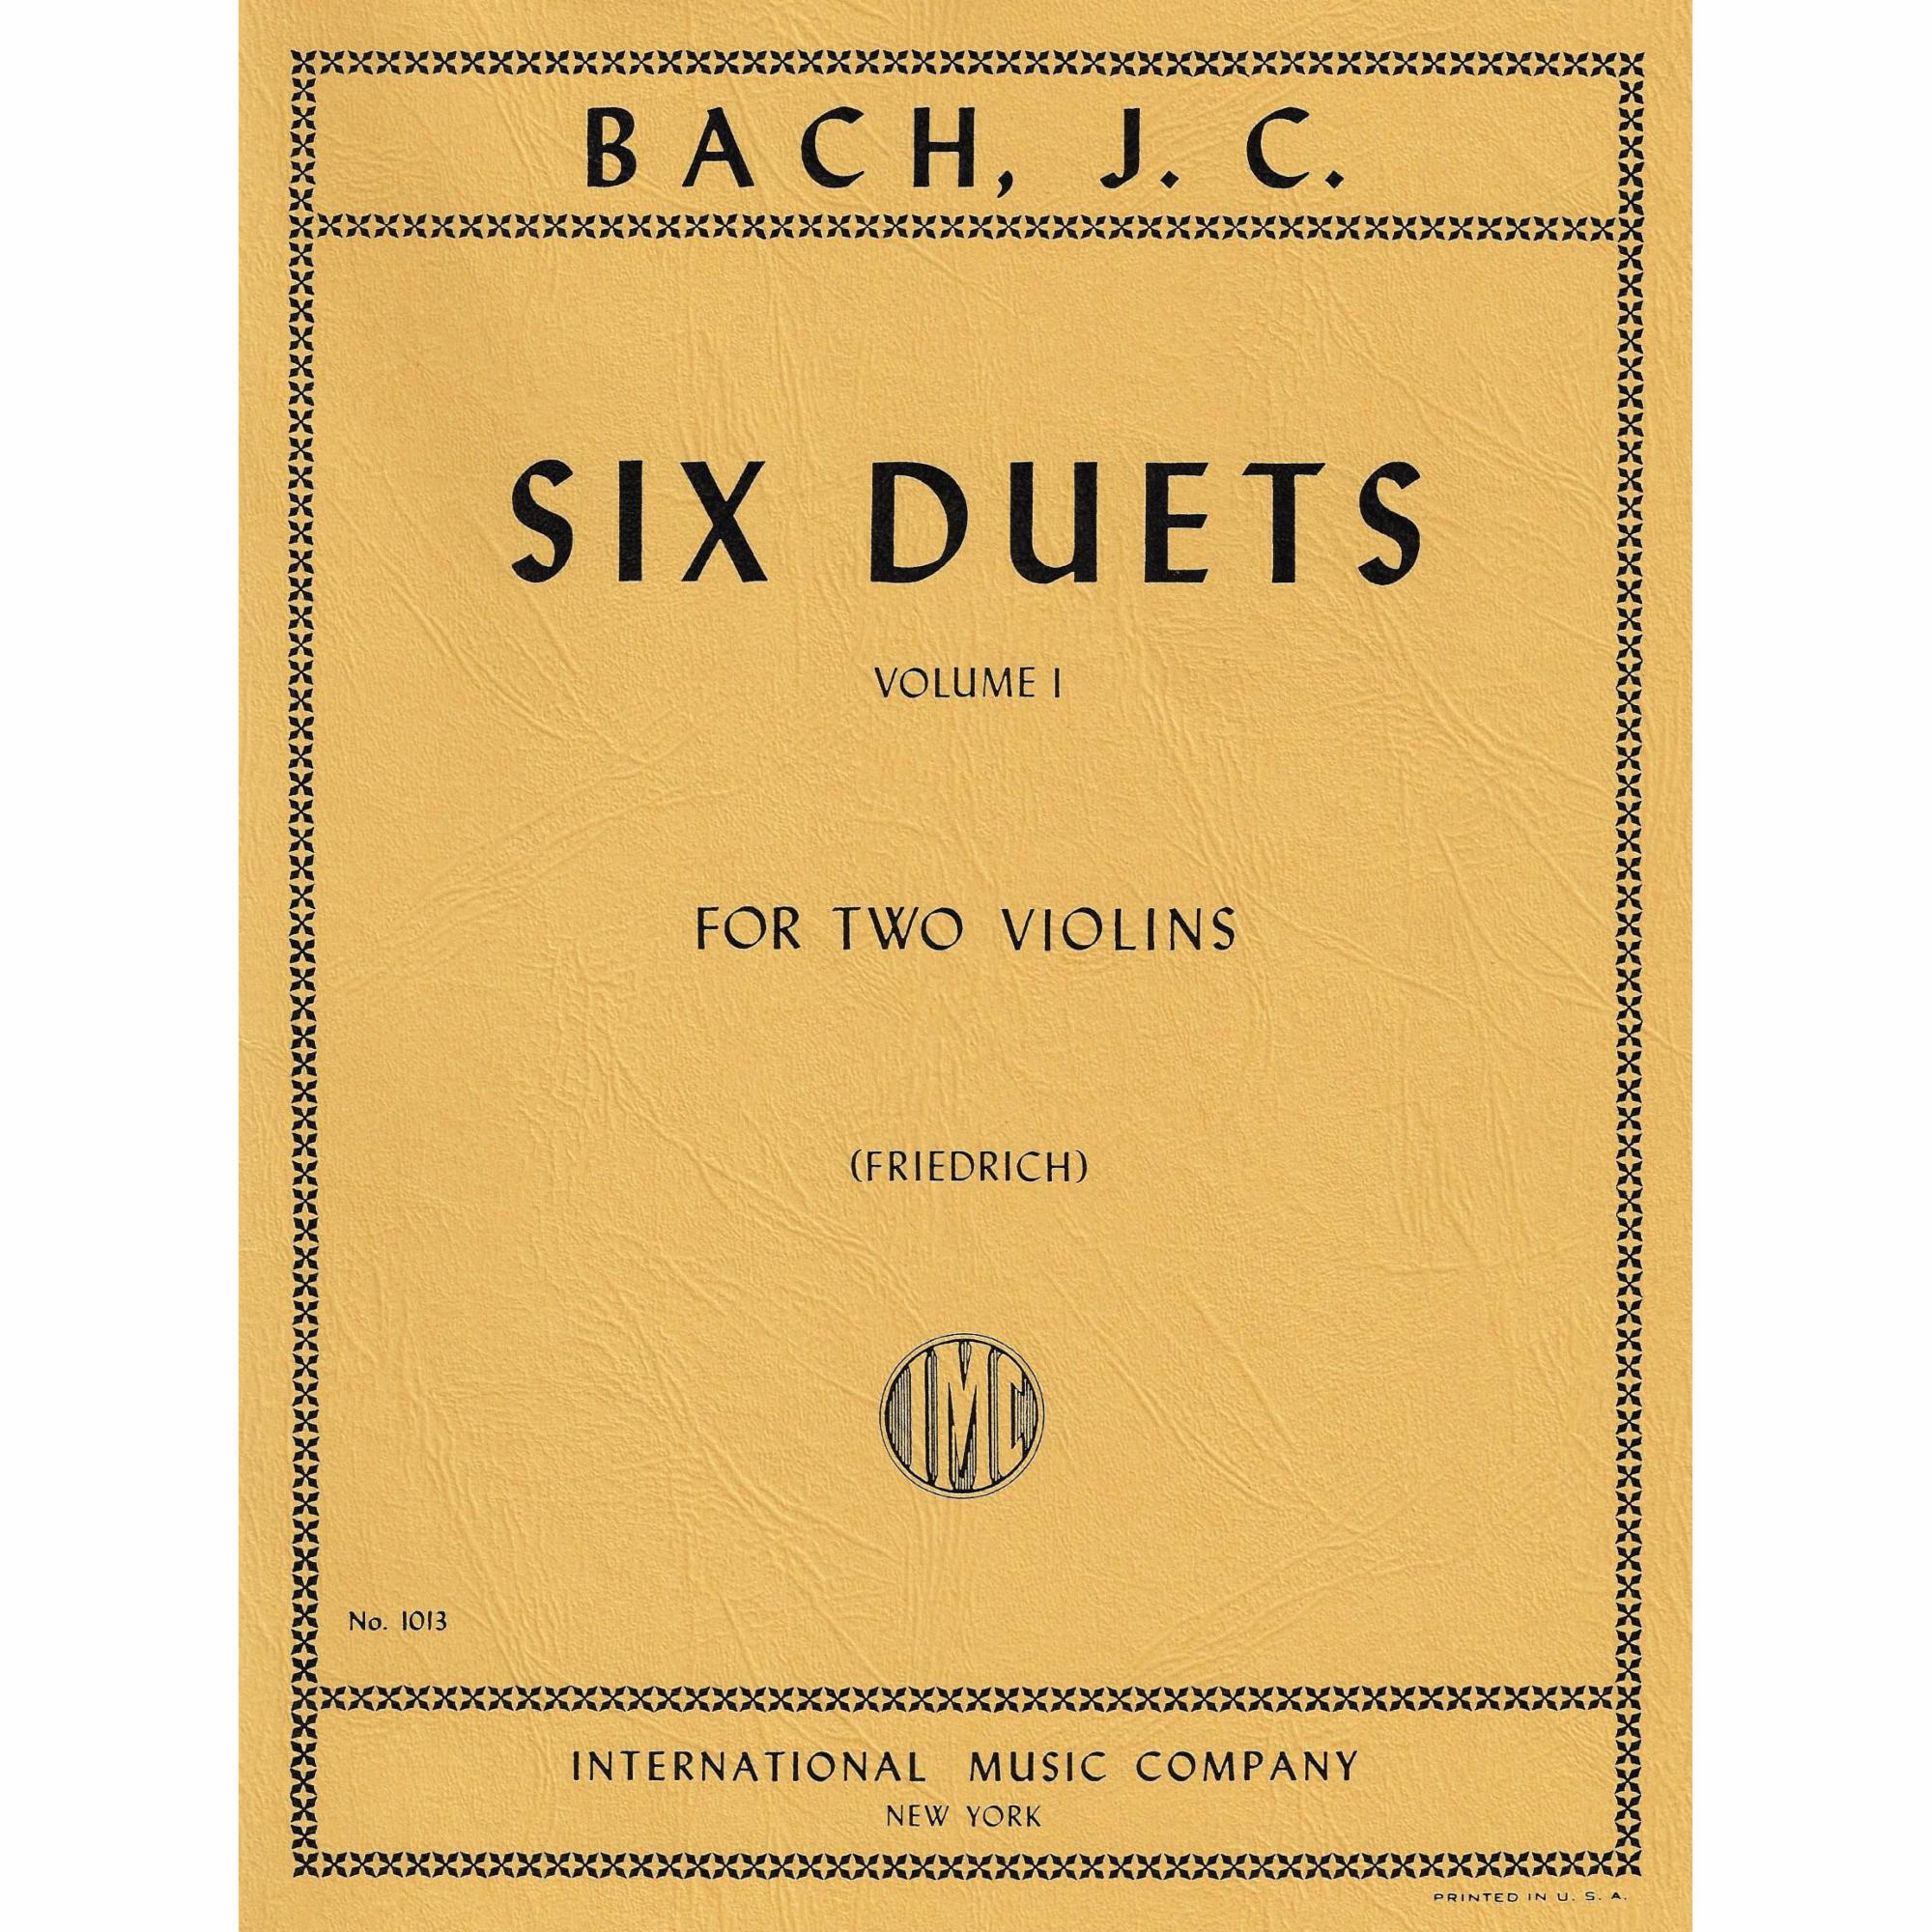 J. C. Bach -- Six Duets, Volumes I-II for Two Violins